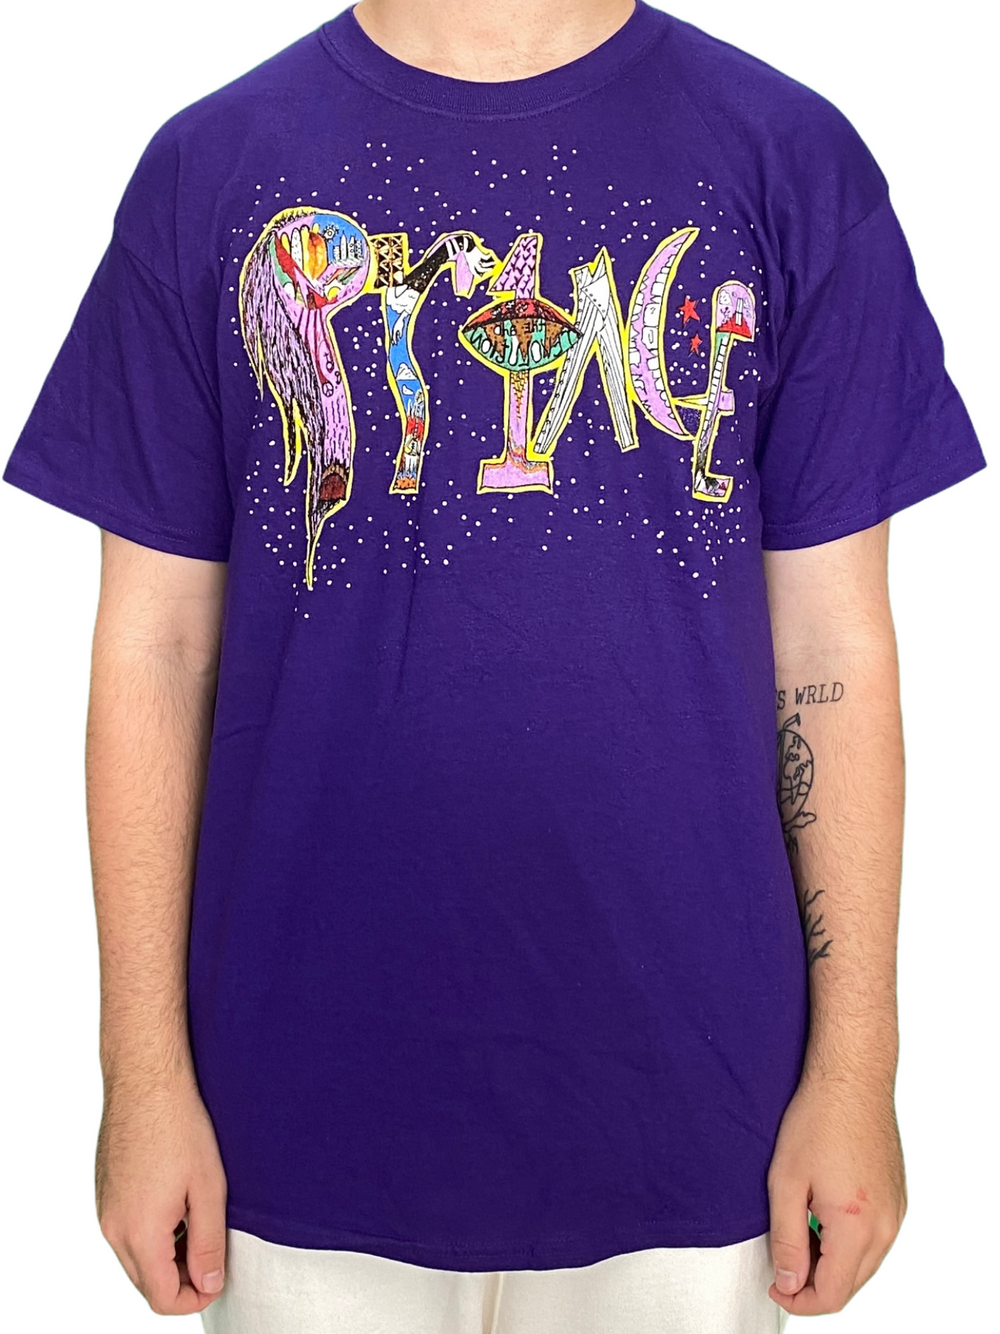 Prince – 1999 Album Cover Front & Back Unisex Official T Shirt Made In USA